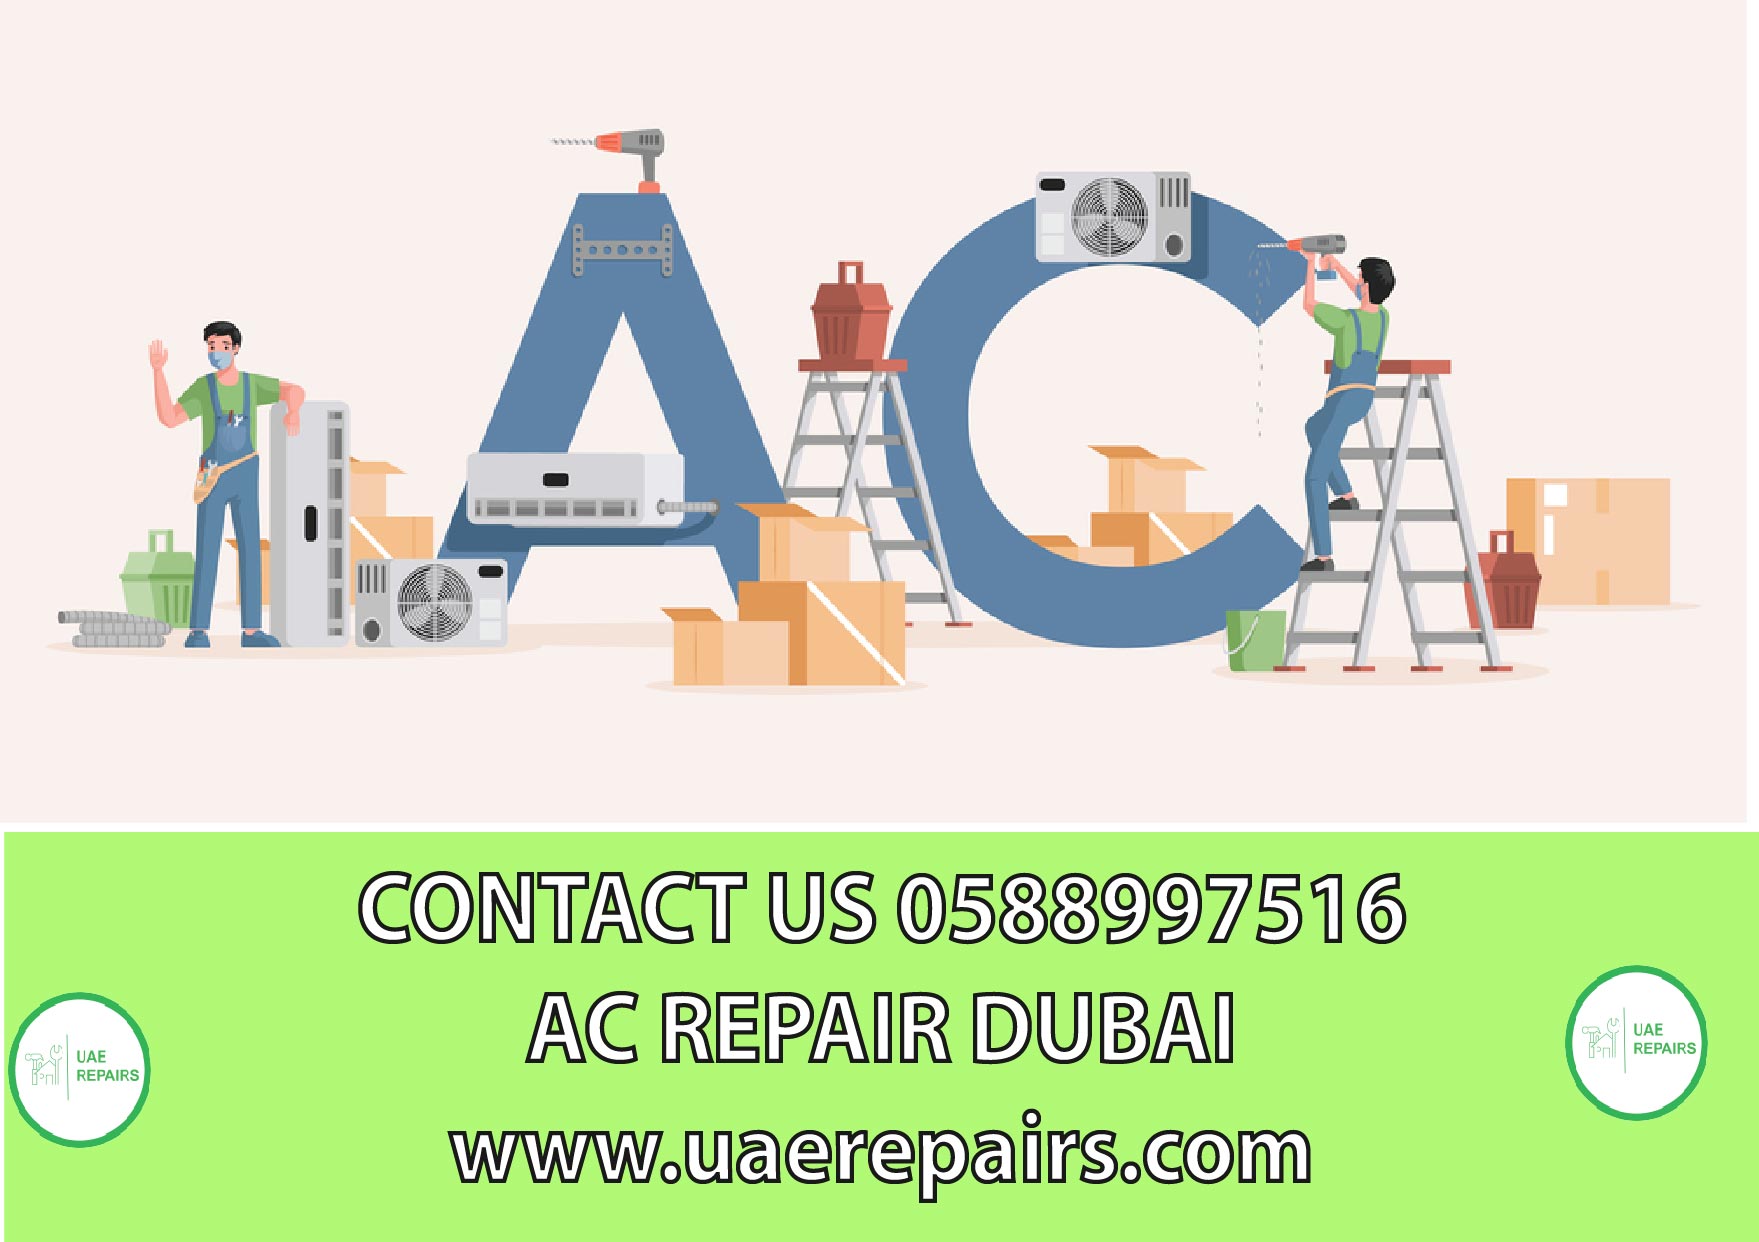 CONTACT US FOR TRUSTED AND ARRFODABLE SERVICES IN DUBAI 0588997516